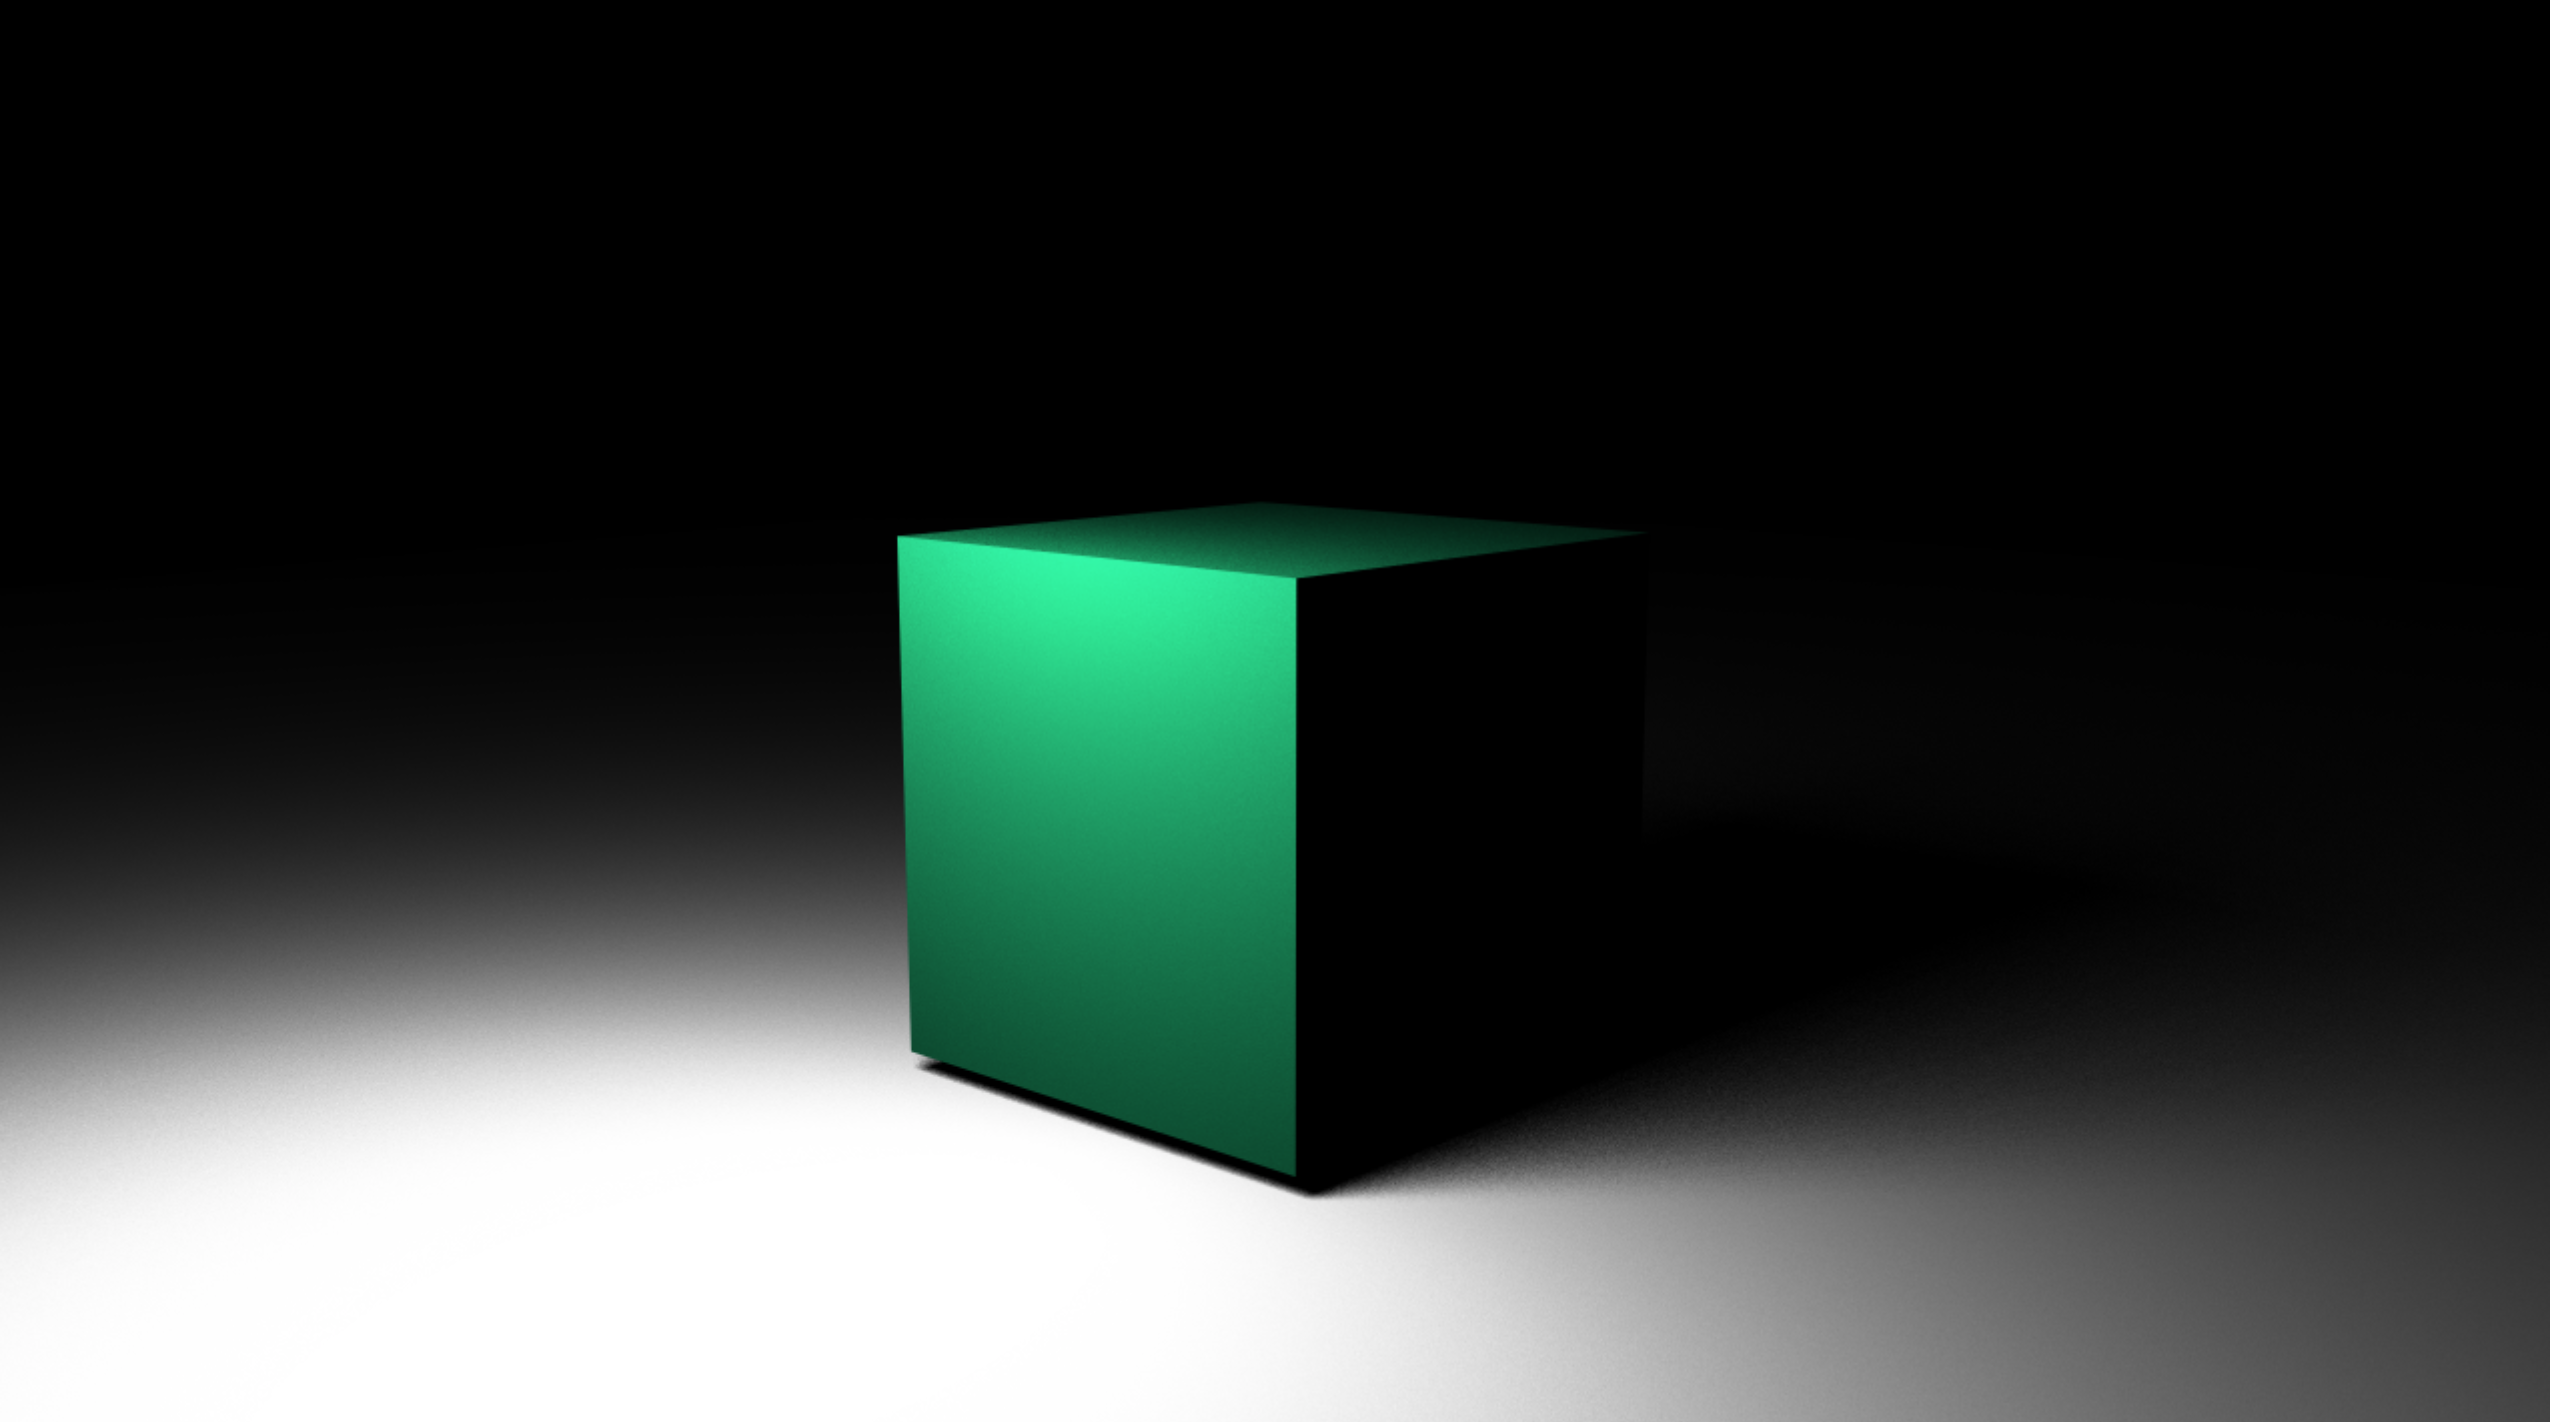 Diffuse rendering of a cube model with 256 samples